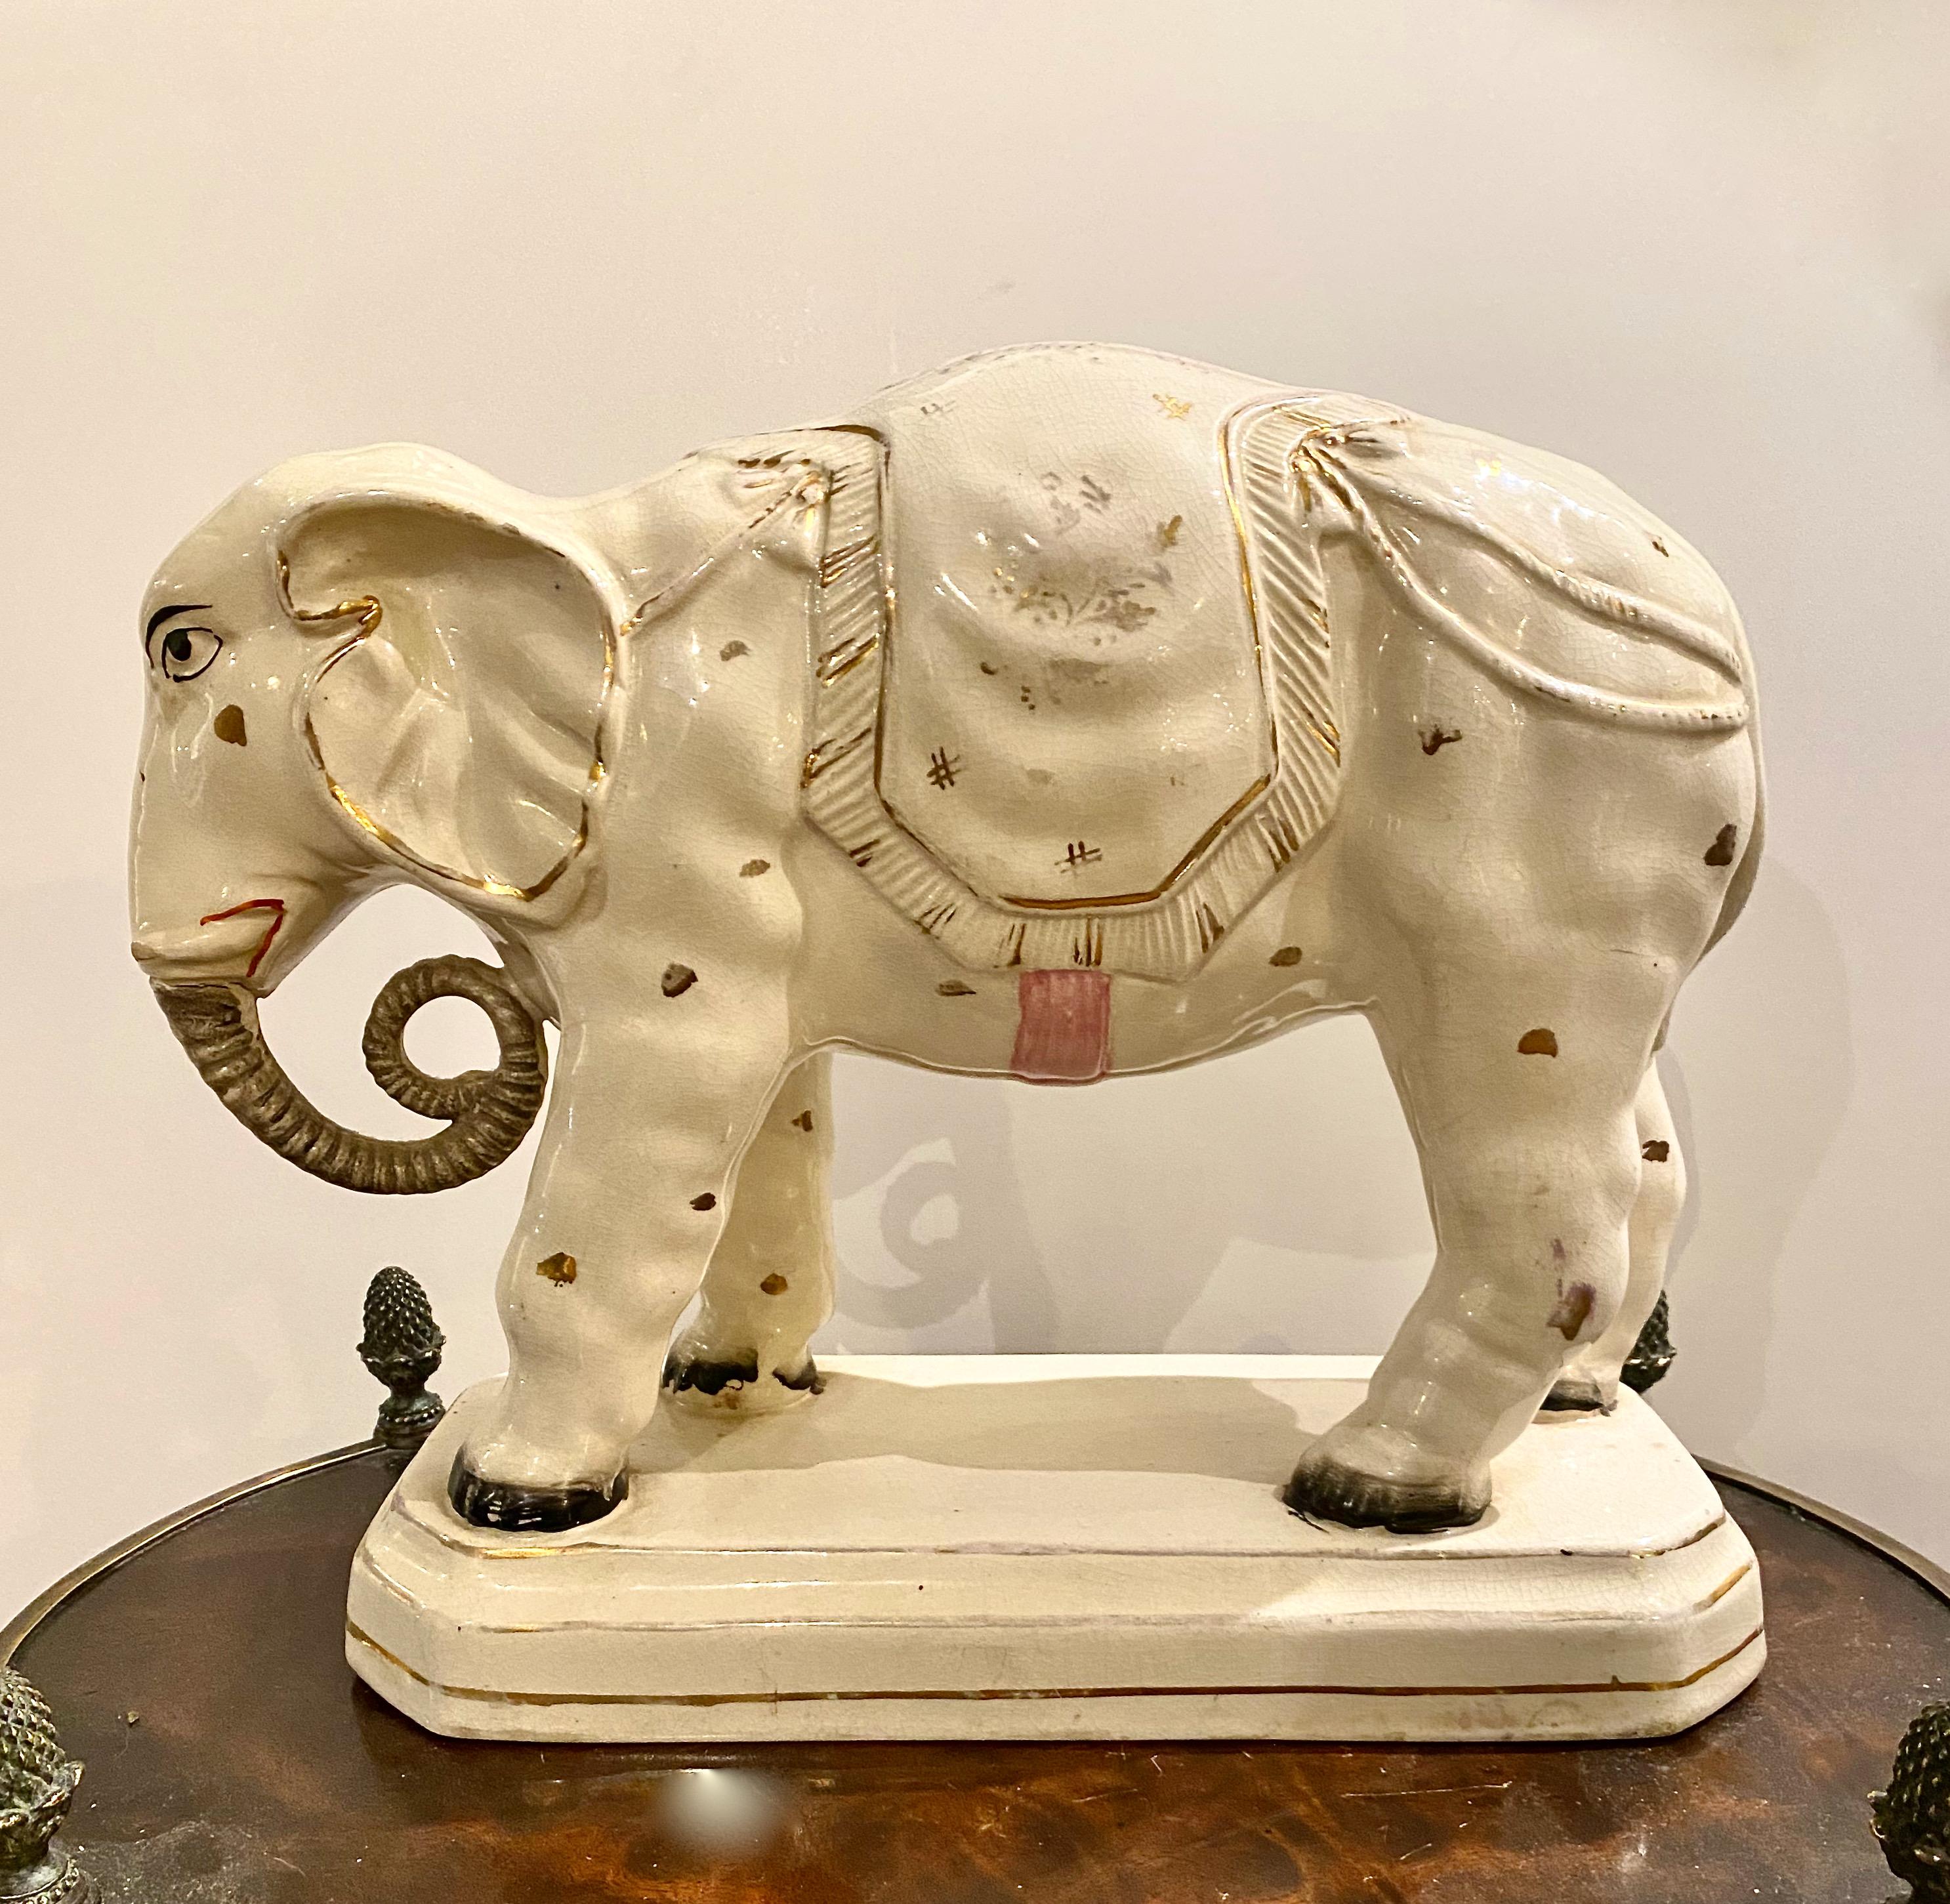 This is a very rare and large Staffordshire figure of an Indian elephant on a plinth, dressed in its traditional drapings. The elephant dates to c. 1880 and is in overall very good condition. There is minor patina and a bit of crazing which is